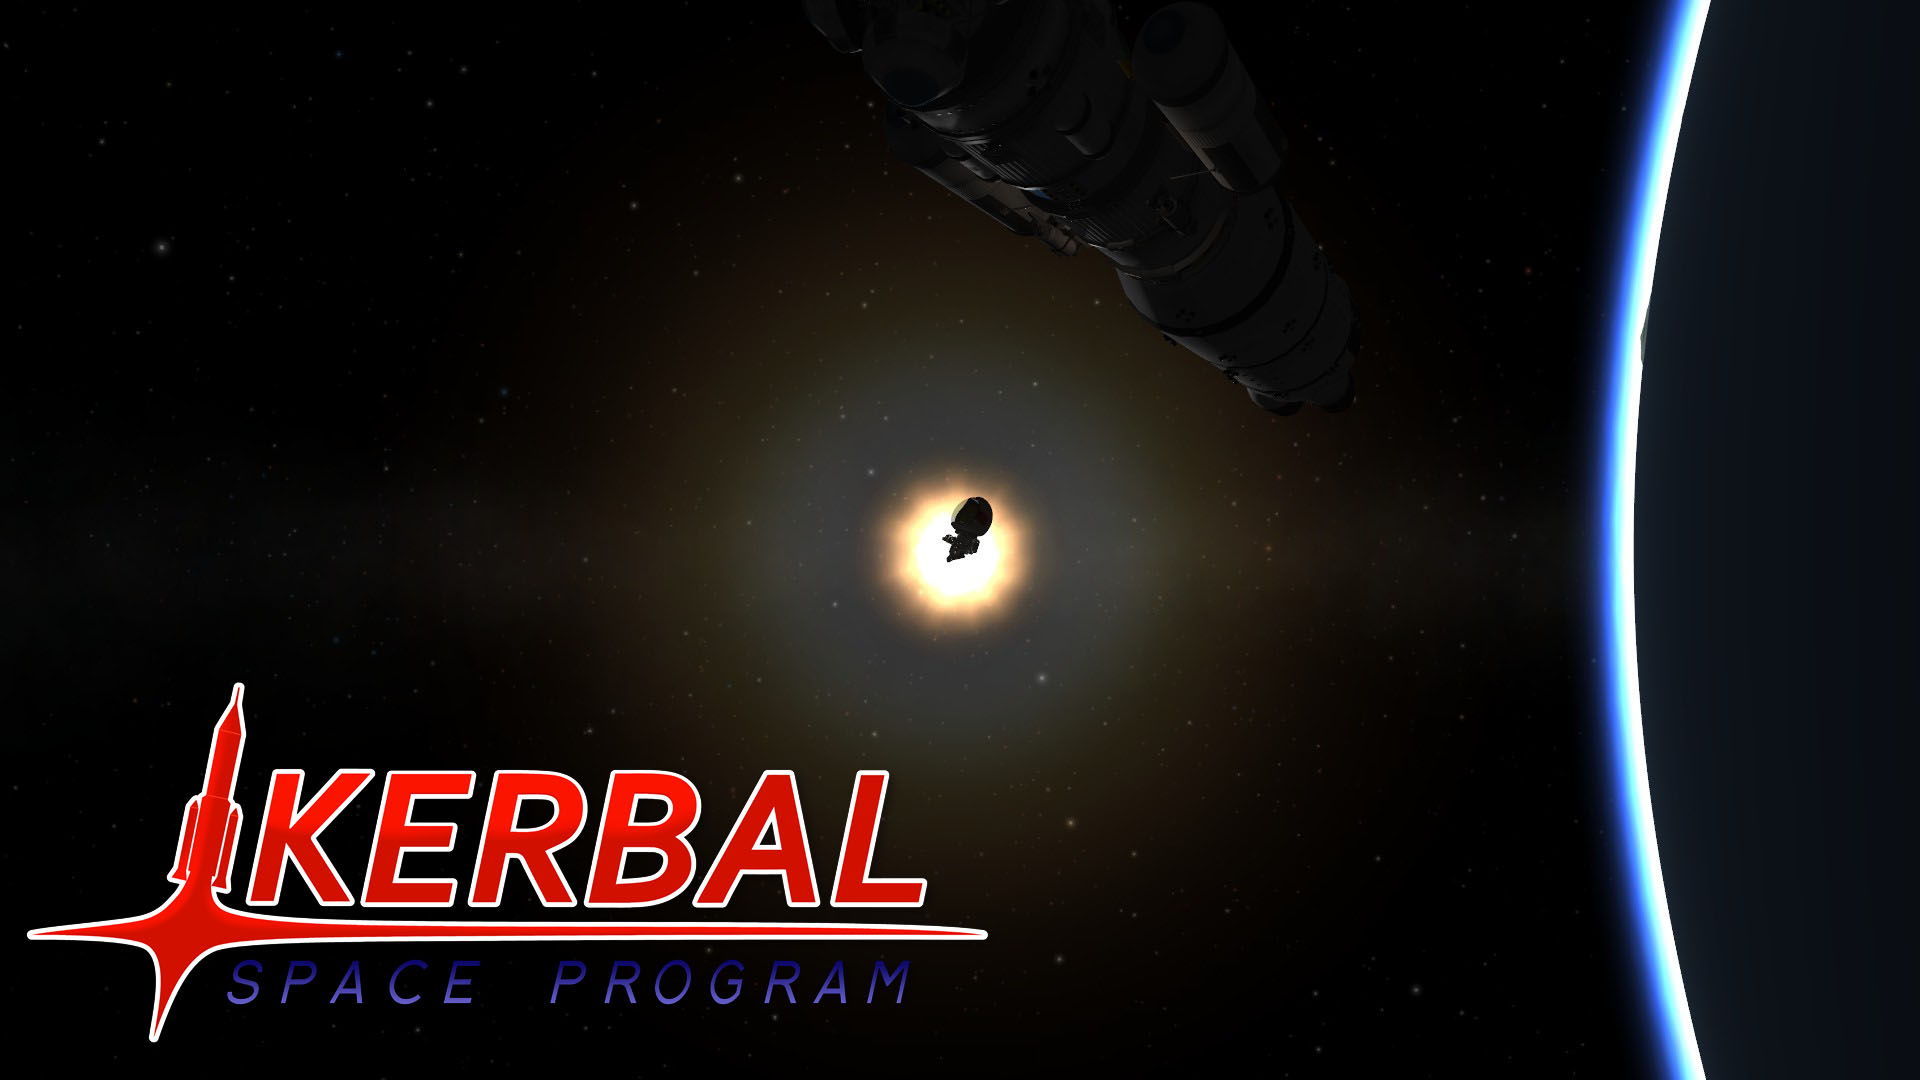 video game, kerbal space program, space wallpaper for mobile